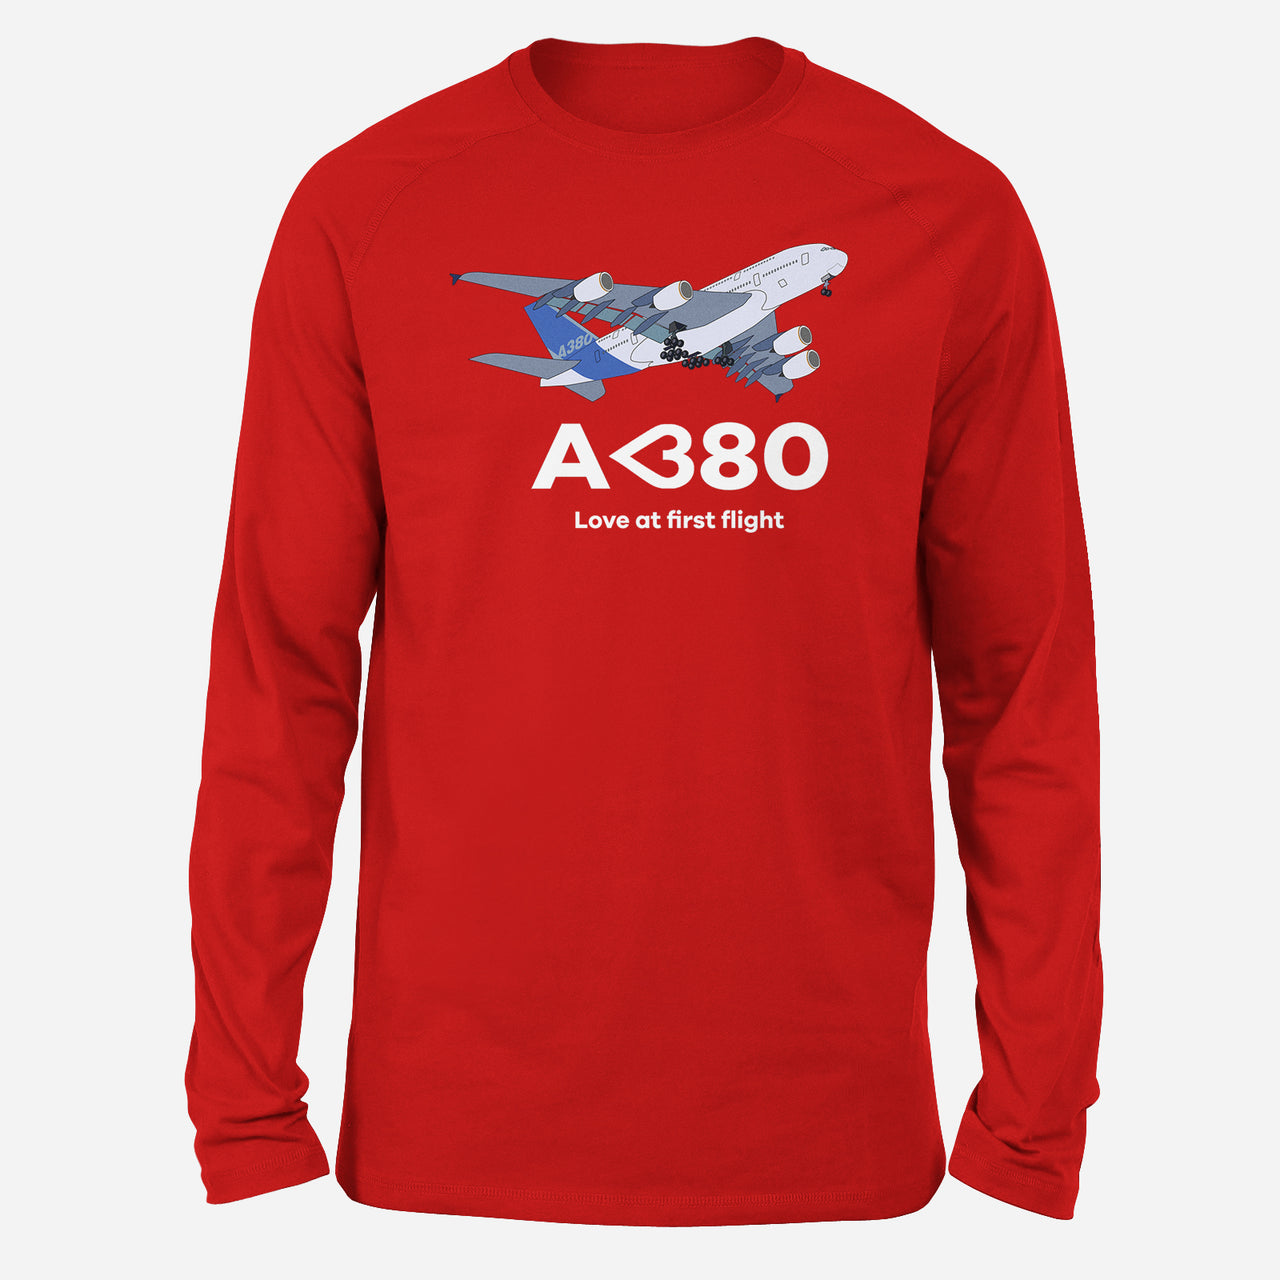 Airbus A380 Love at first flight Designed Long-Sleeve T-Shirts